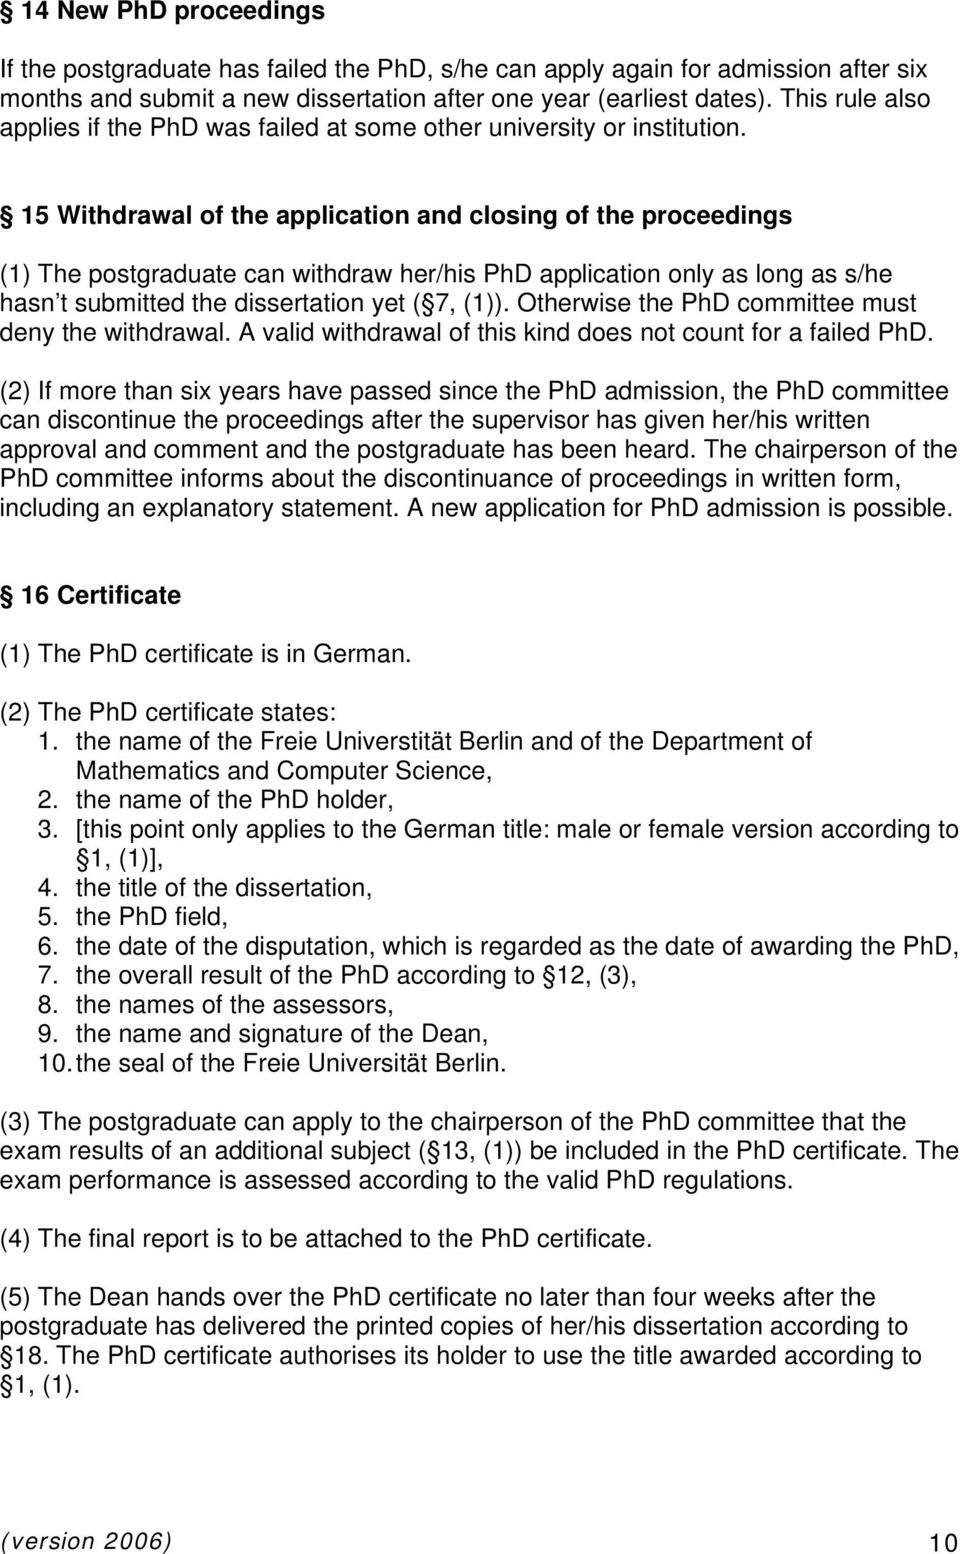 15 Withdrawal of the application and closing of the proceedings (1) The postgraduate can withdraw her/his PhD application only as long as s/he hasn t submitted the dissertation yet ( 7, (1)).